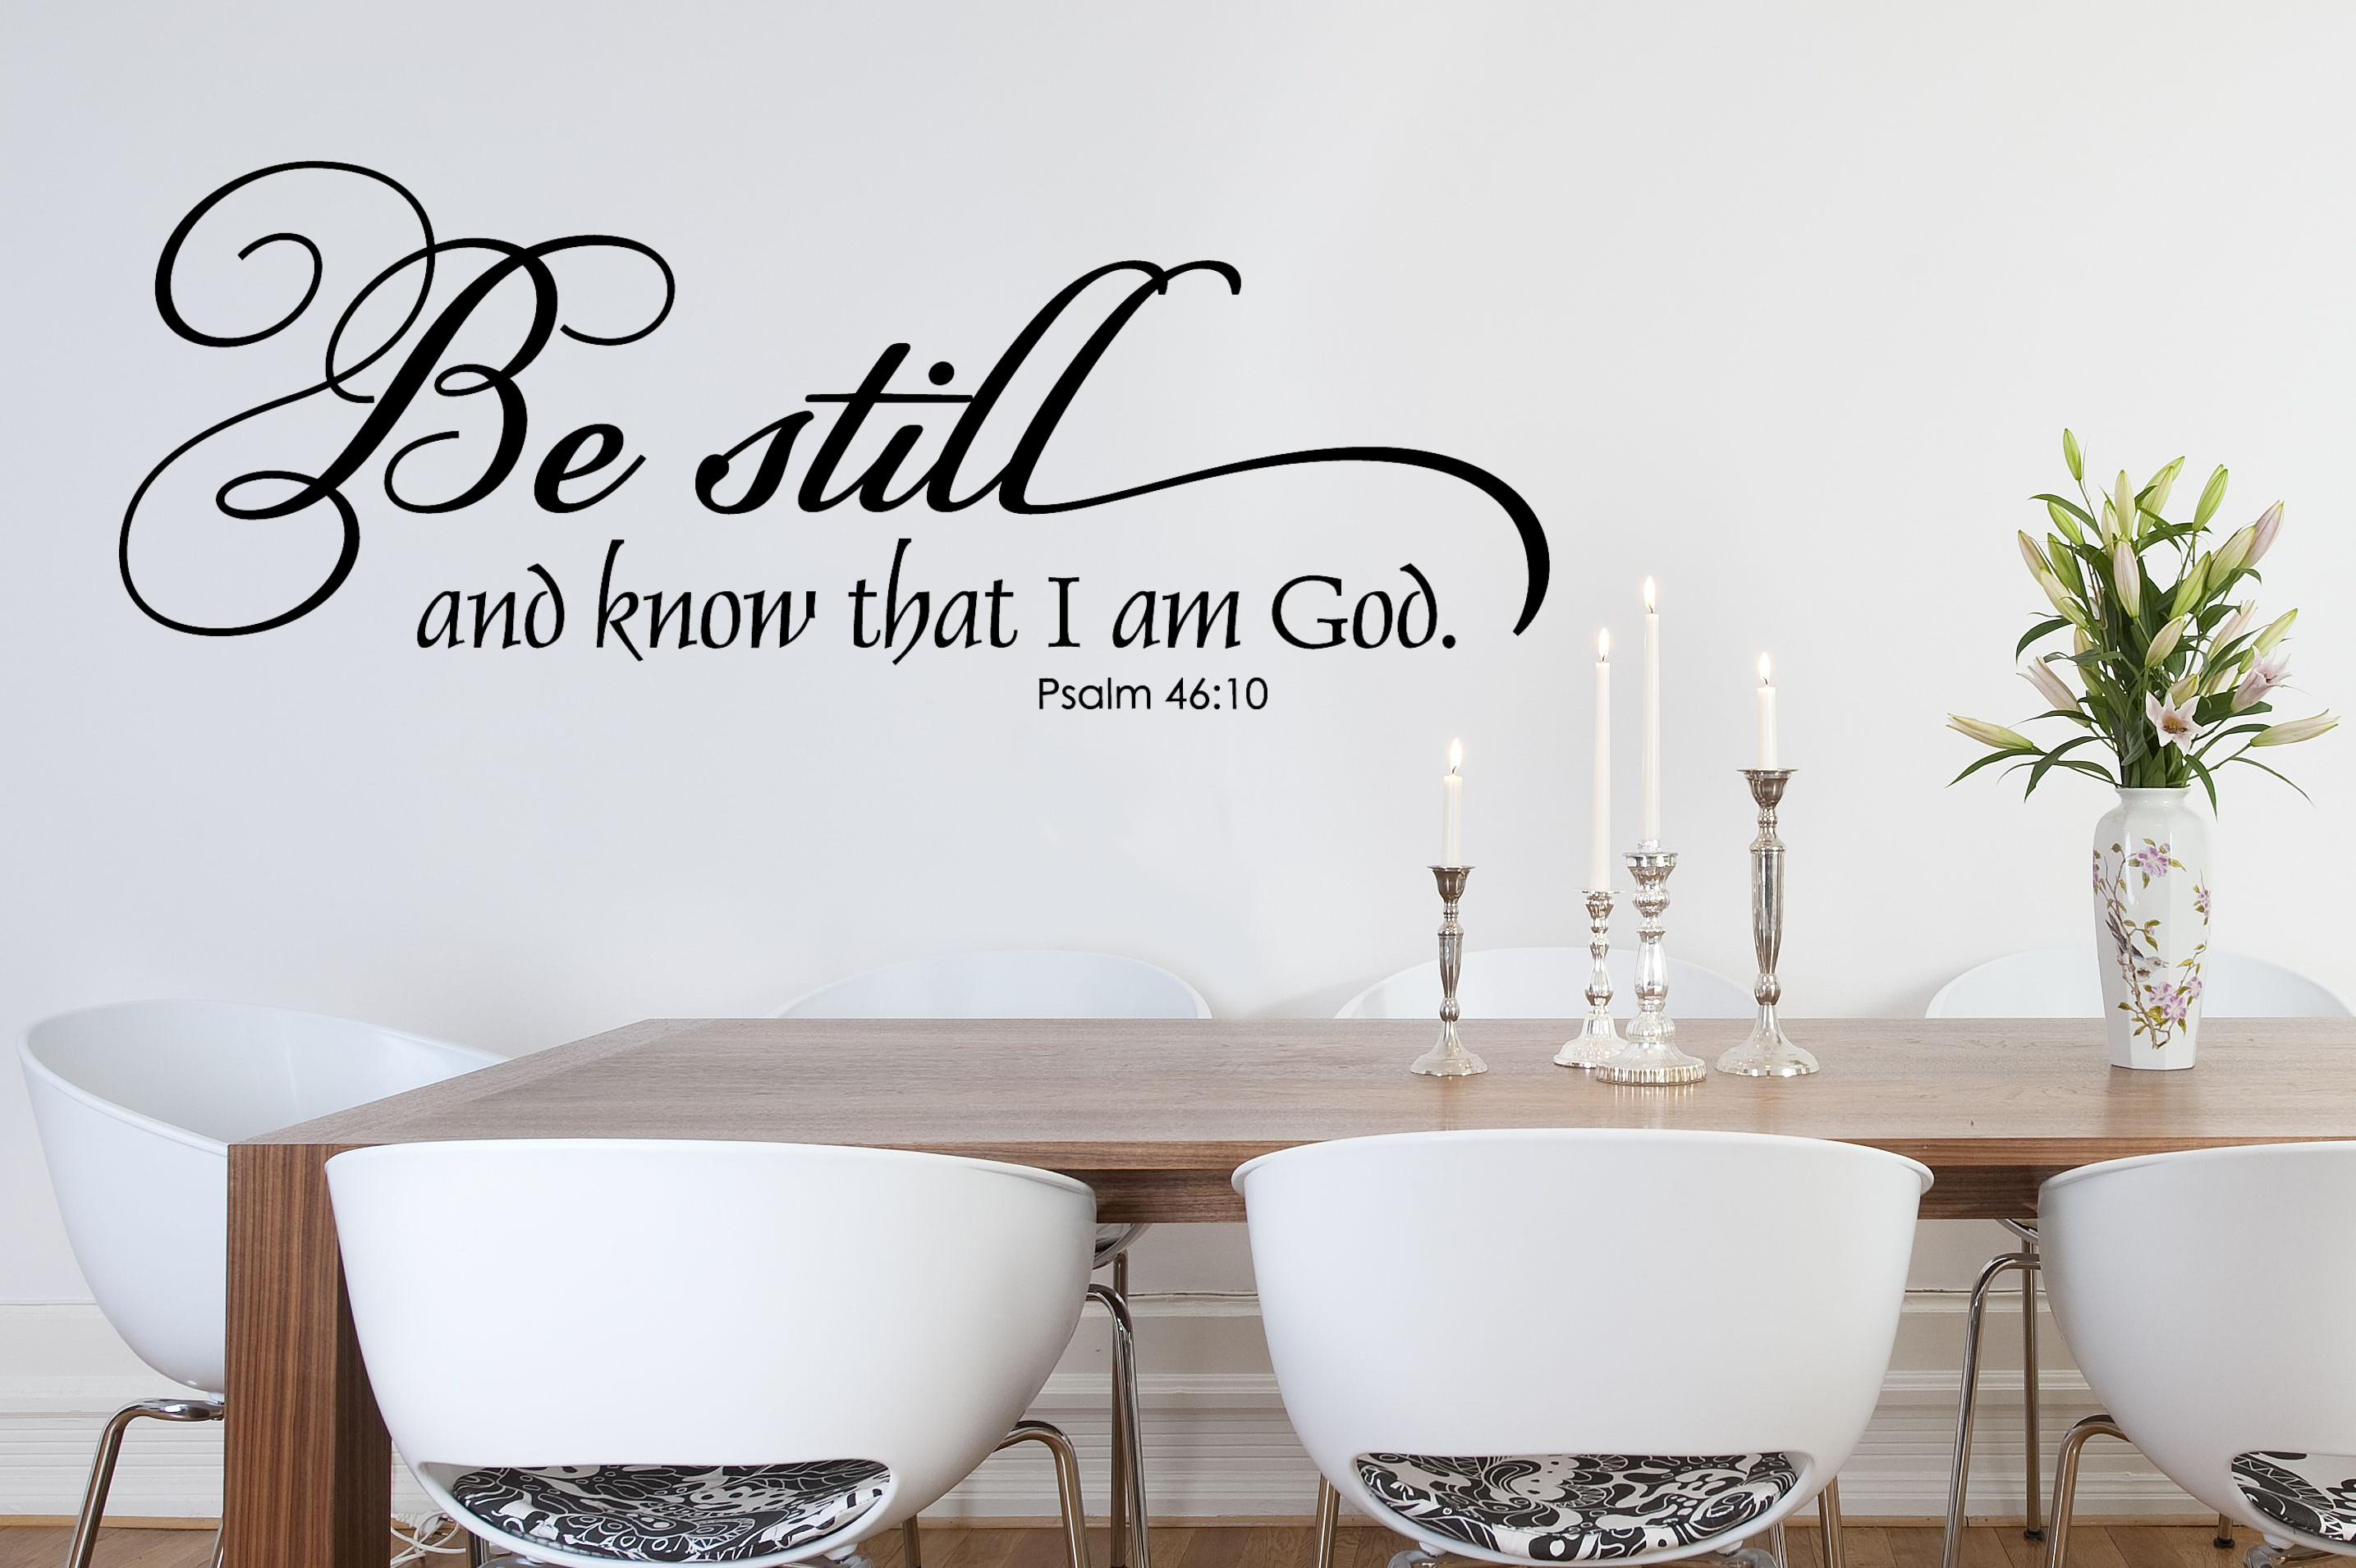 Bedroom Wall Art Stickers Unique Be Still and Know Christian Wall Decal